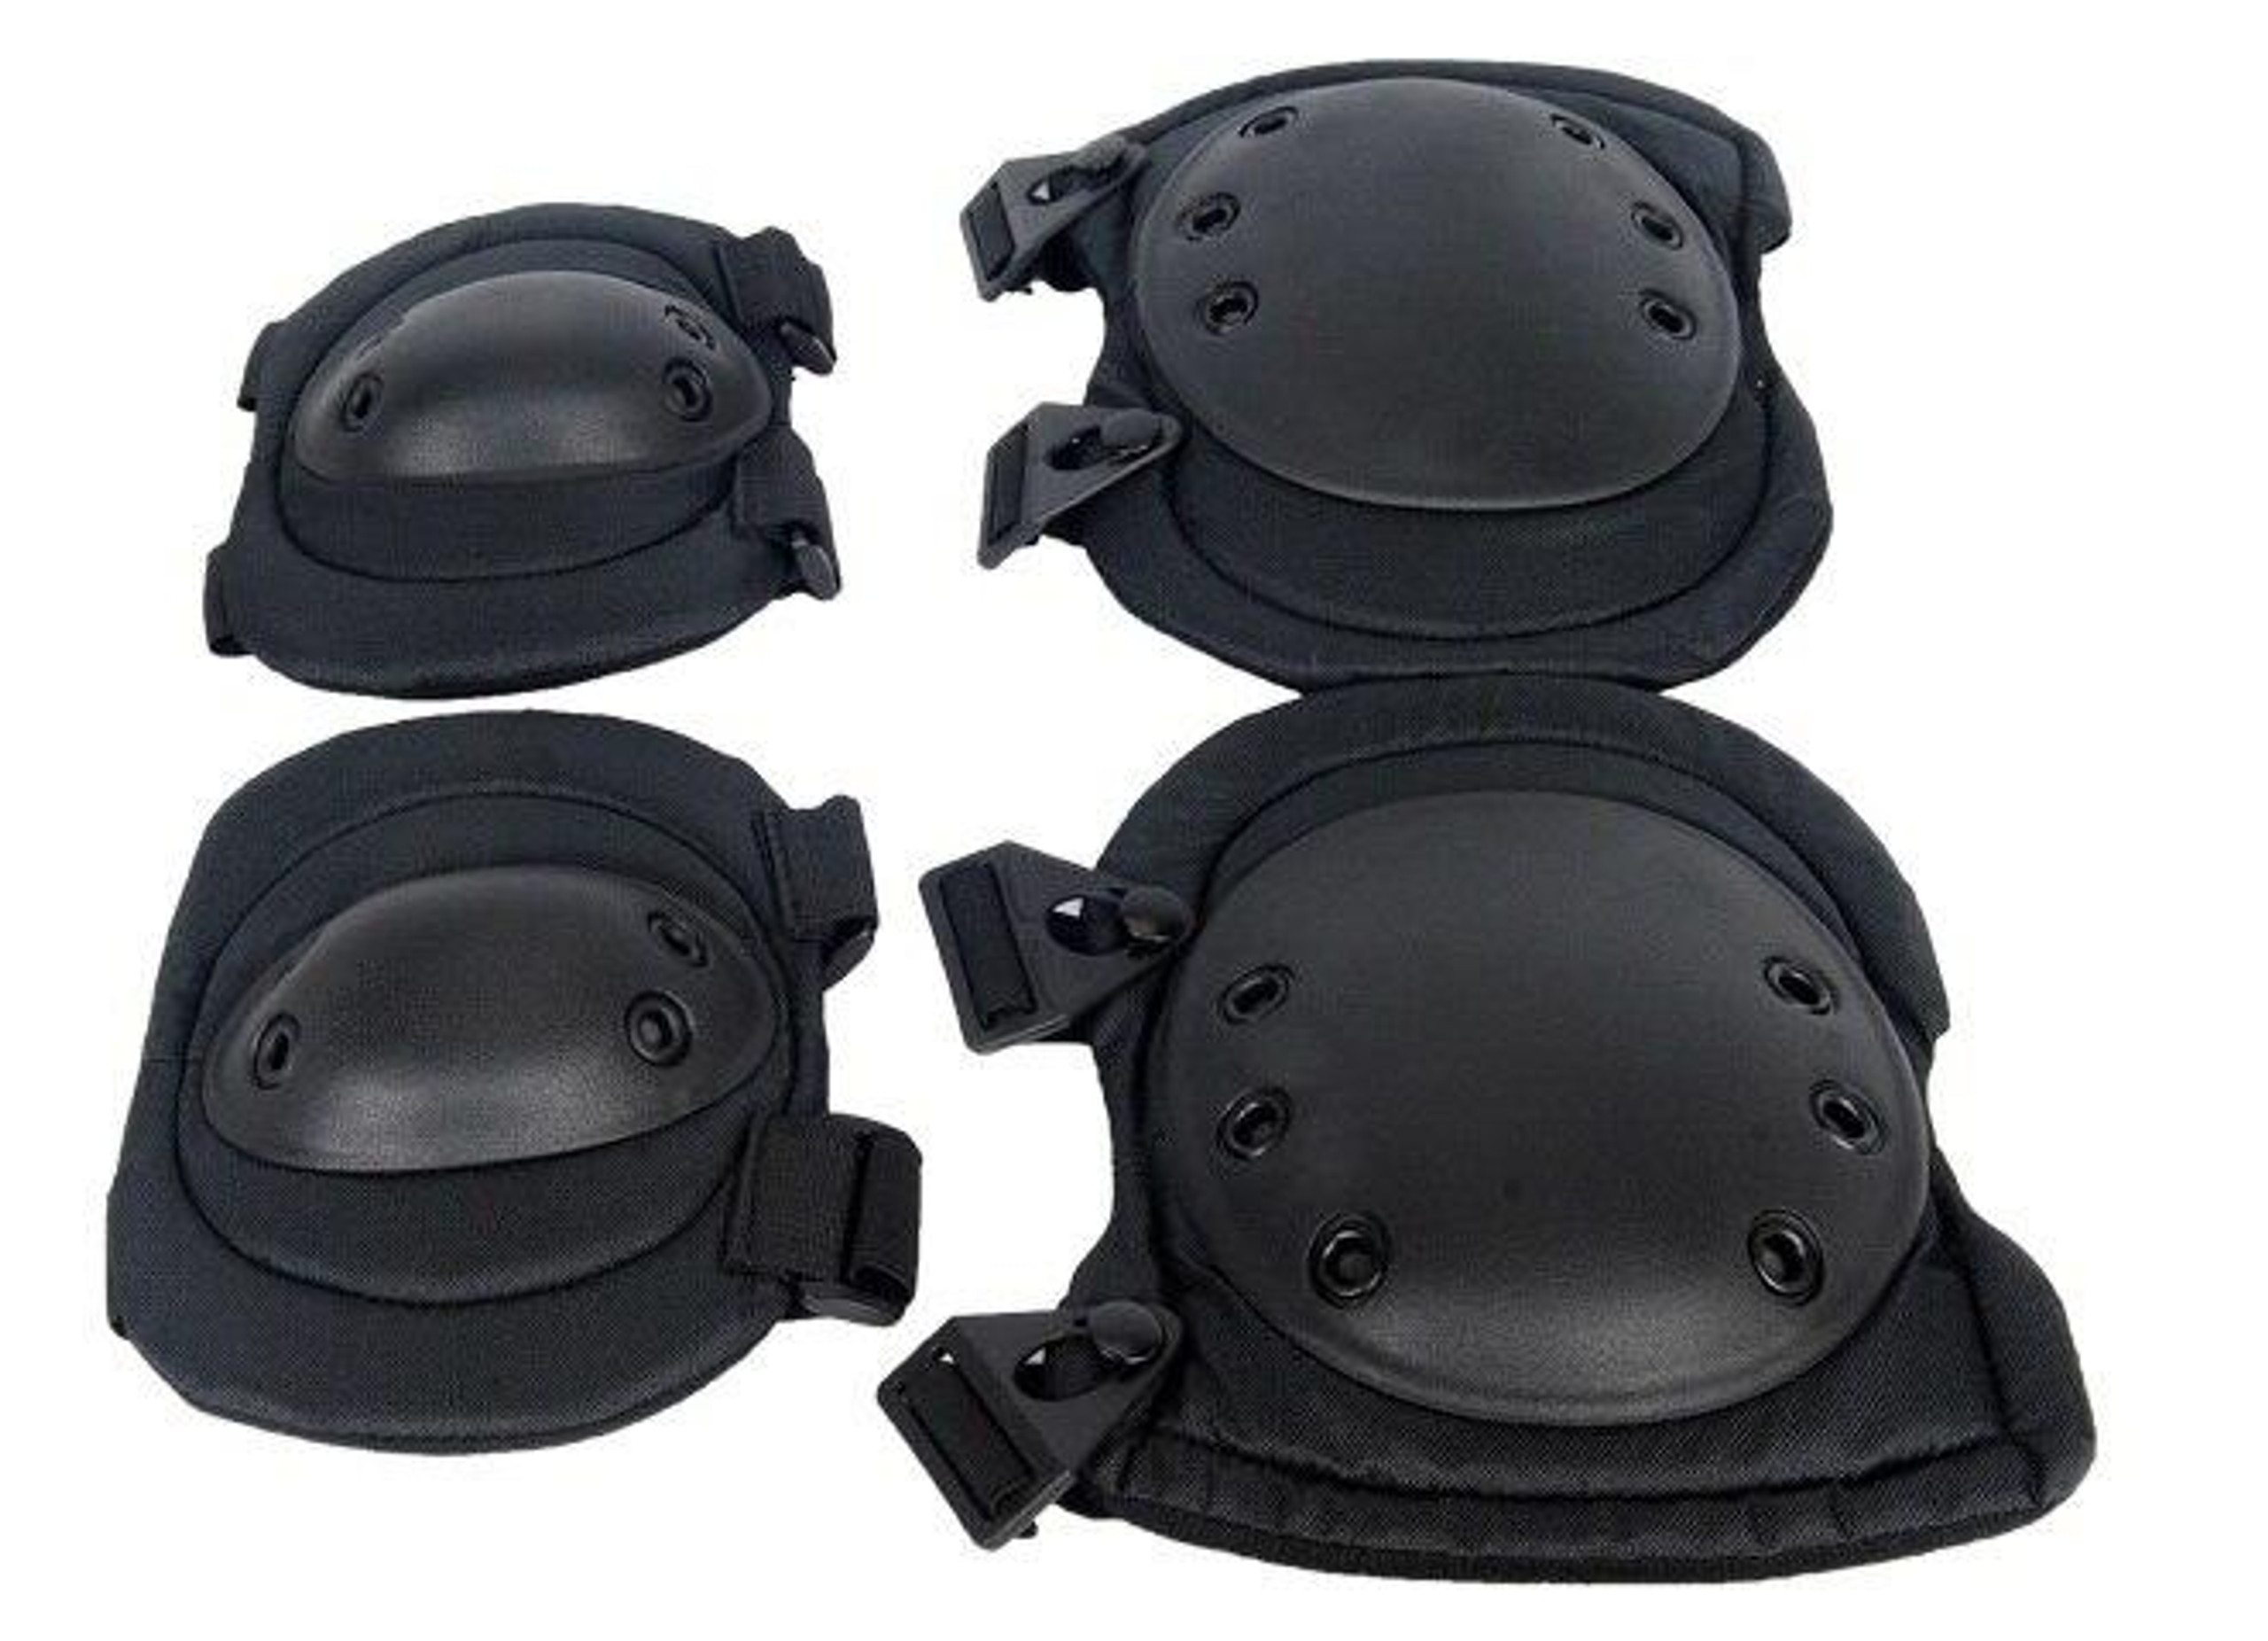 Lancer Tactical Knee and Elbow Pad Set, Black